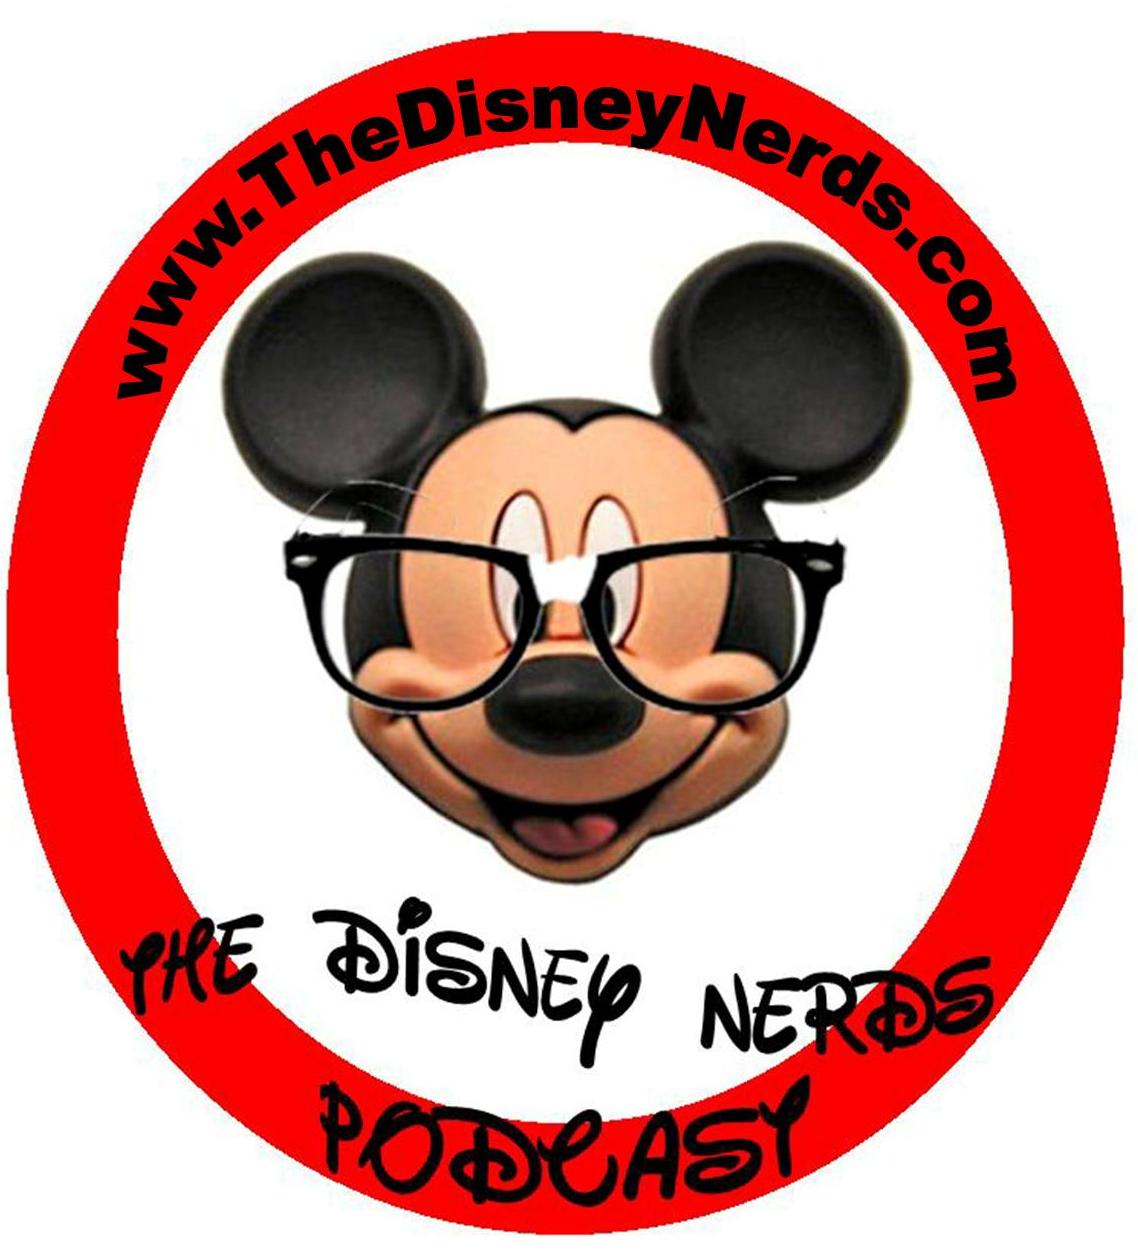 Show # 44 of the Disney Nerds Podcast